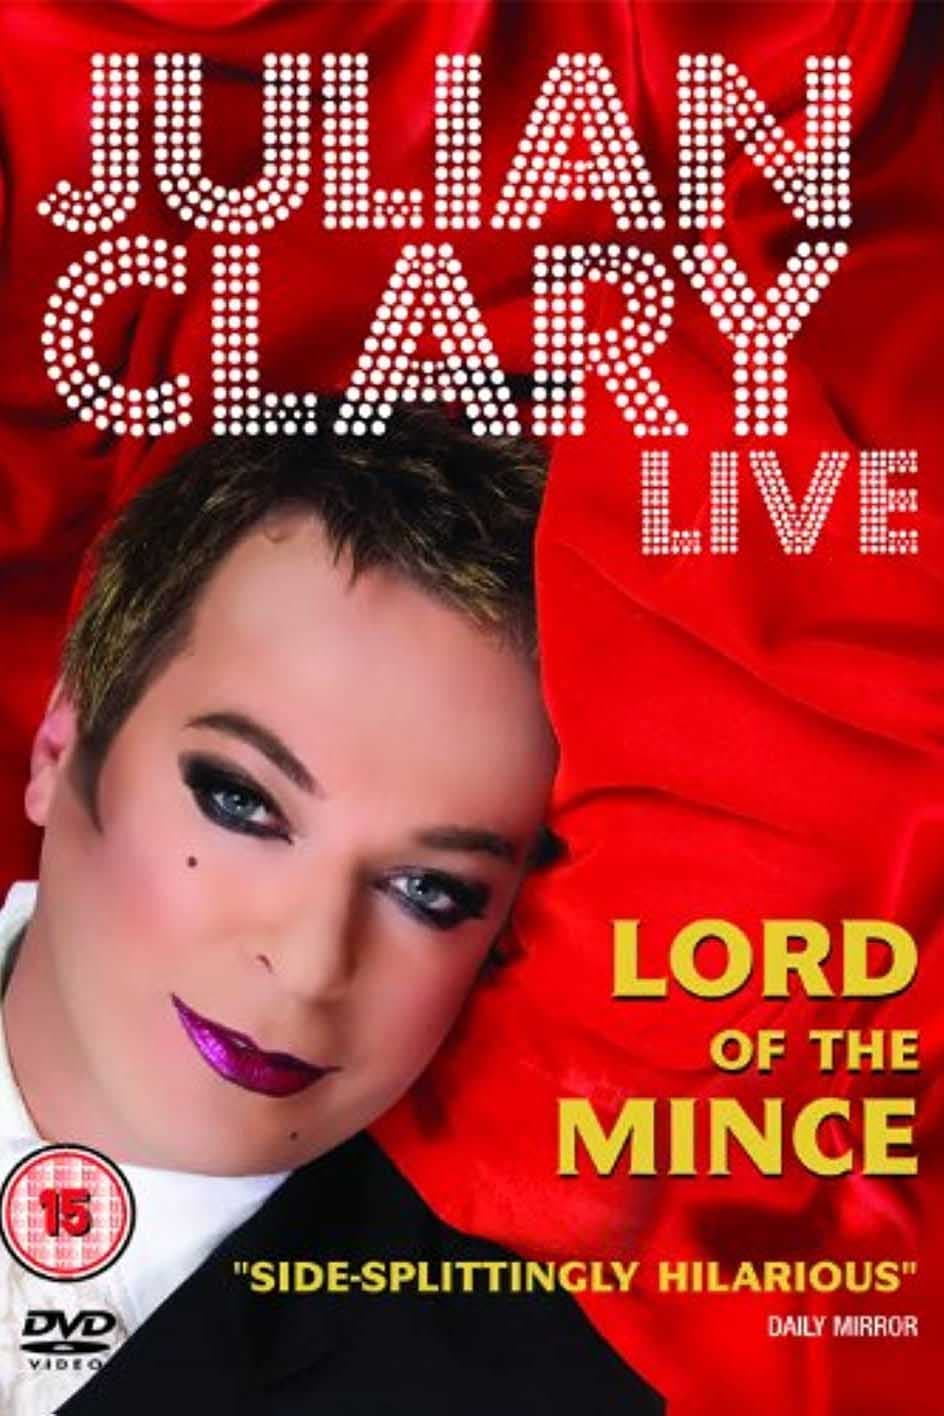 Julian Clary Live: Lord of the Mince